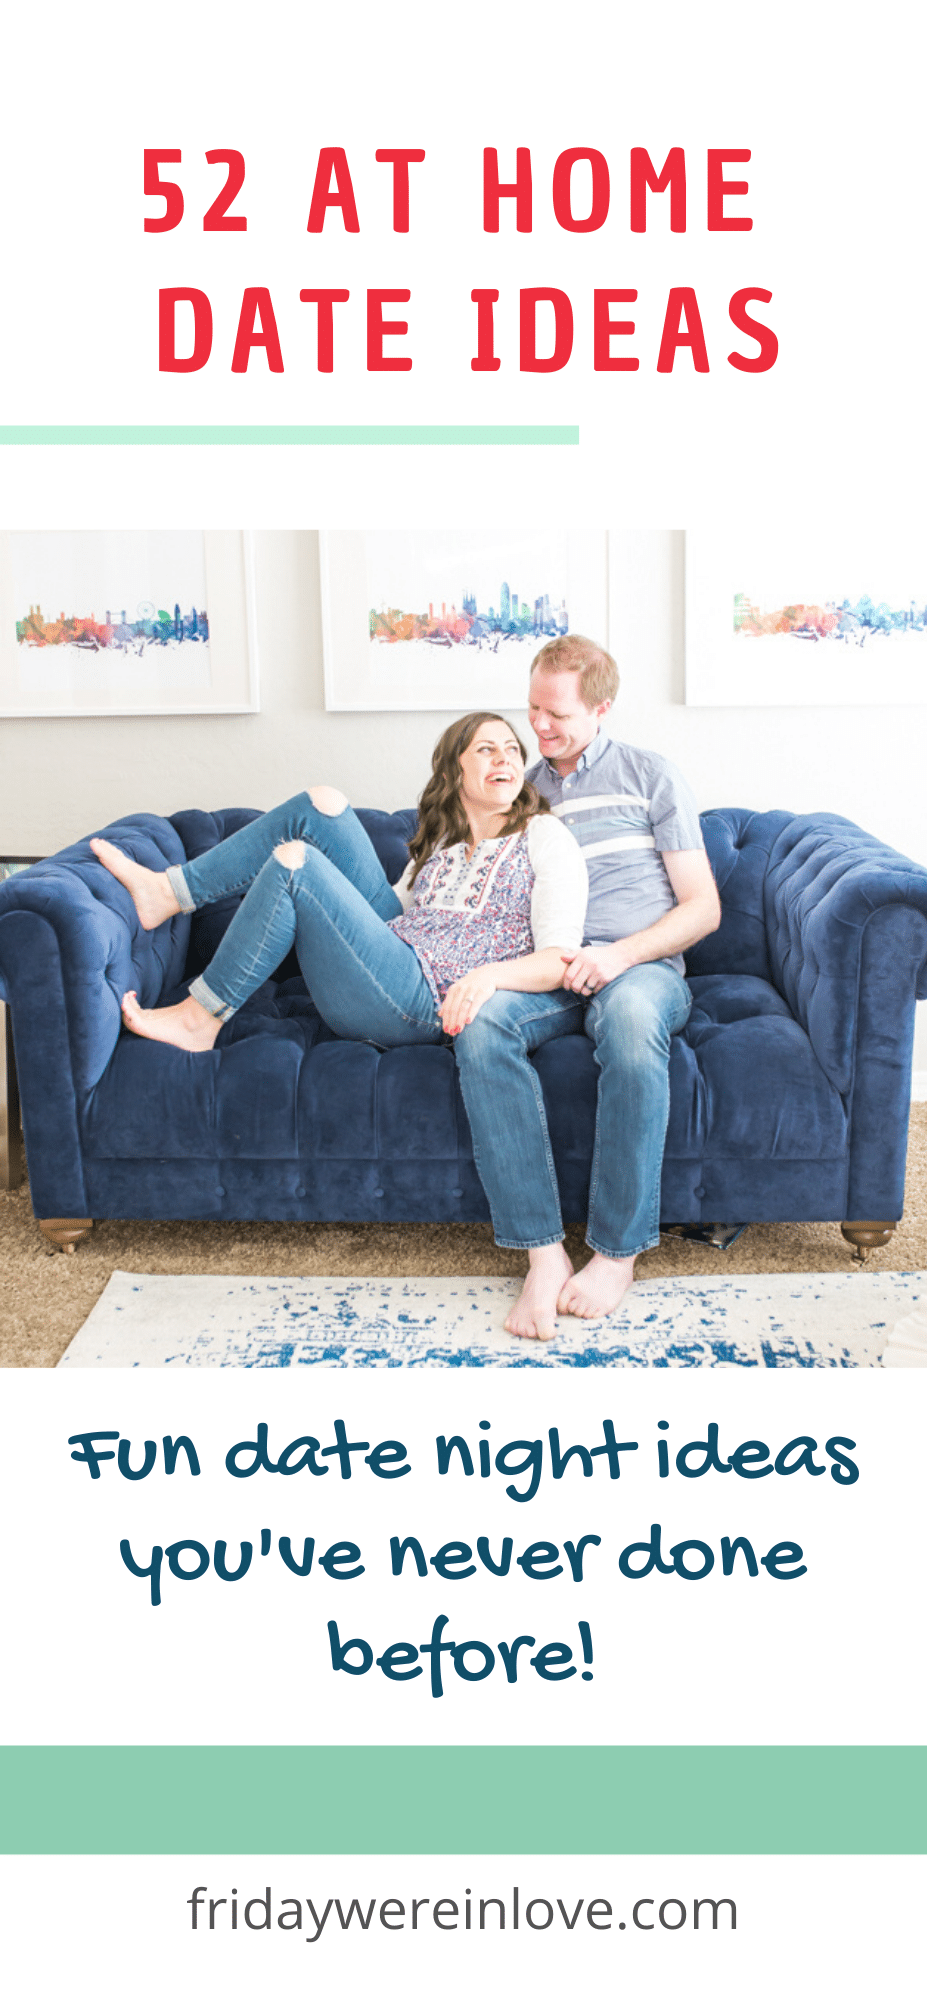 At home date ideas for couples. 